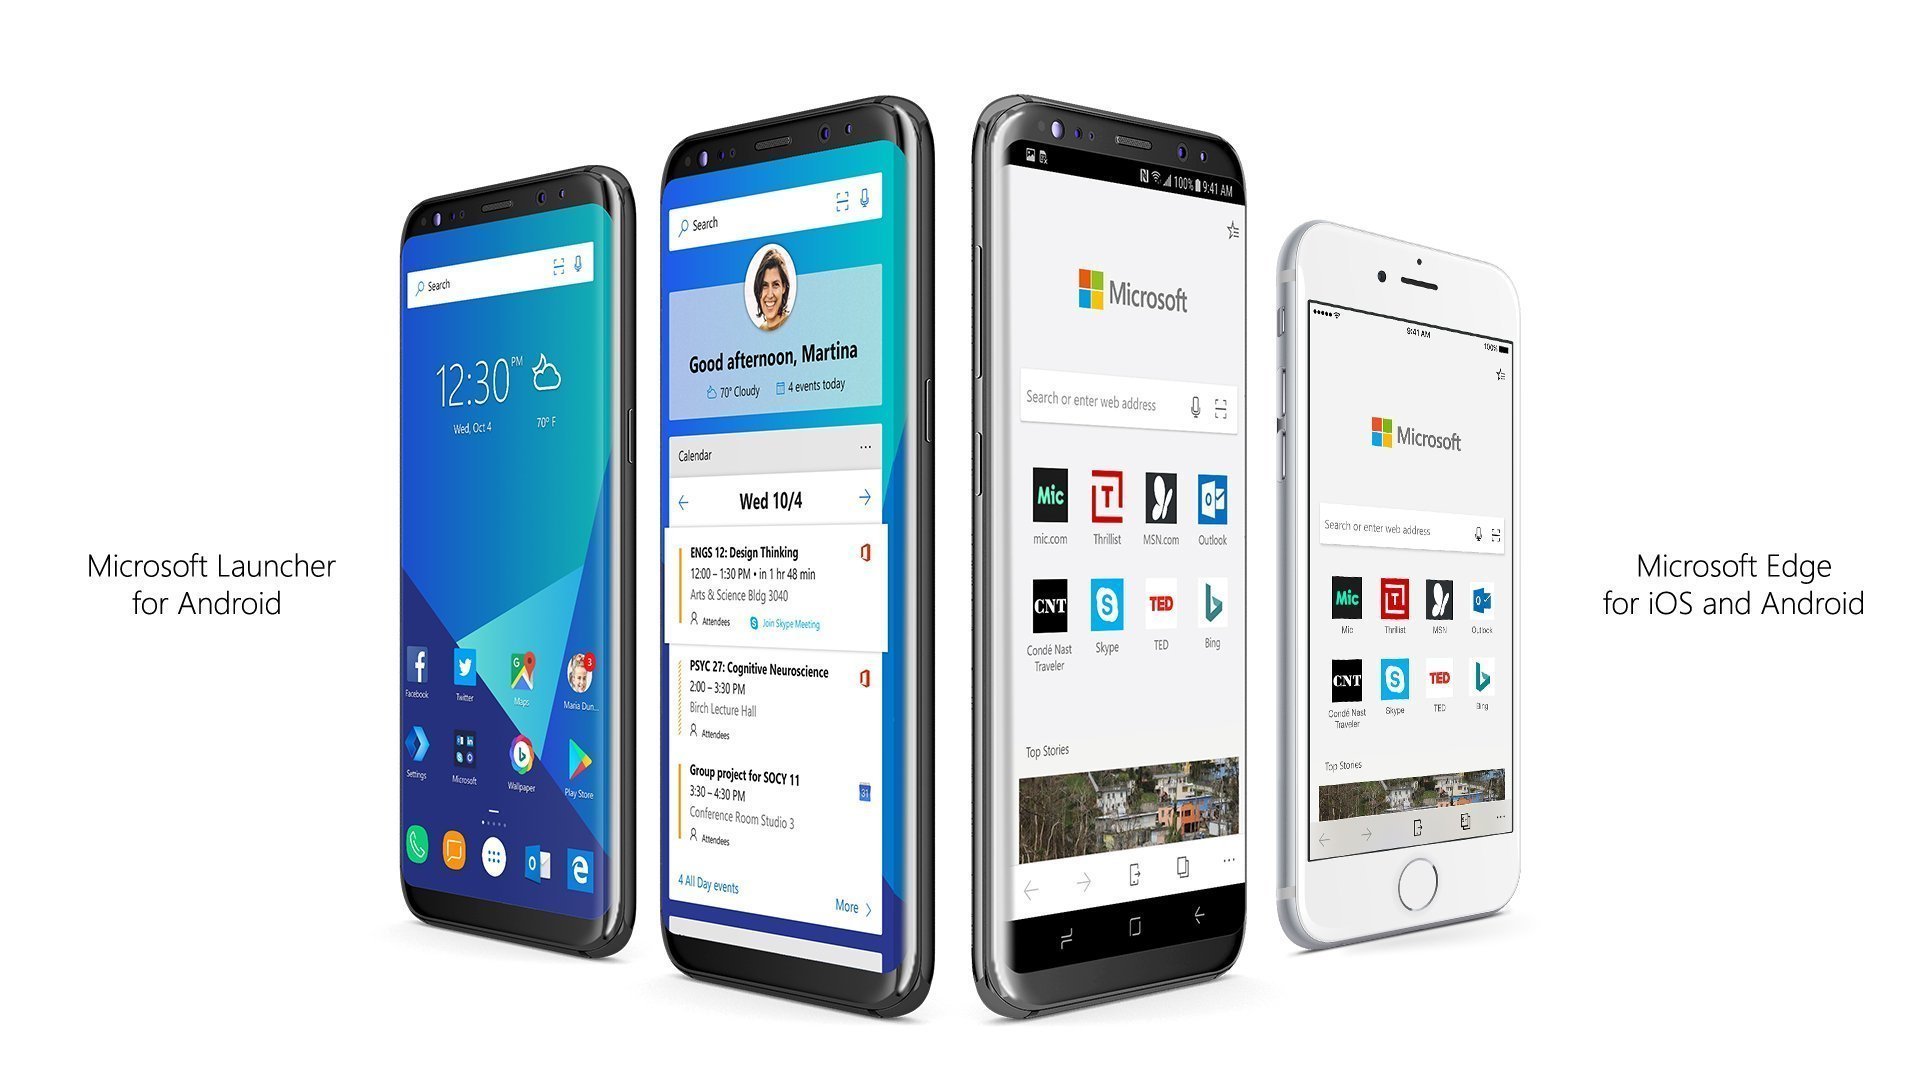 New Microsoft Launcher app 4.10 version for Android caaf609f6273fcc3e9545708498dcded.jpg